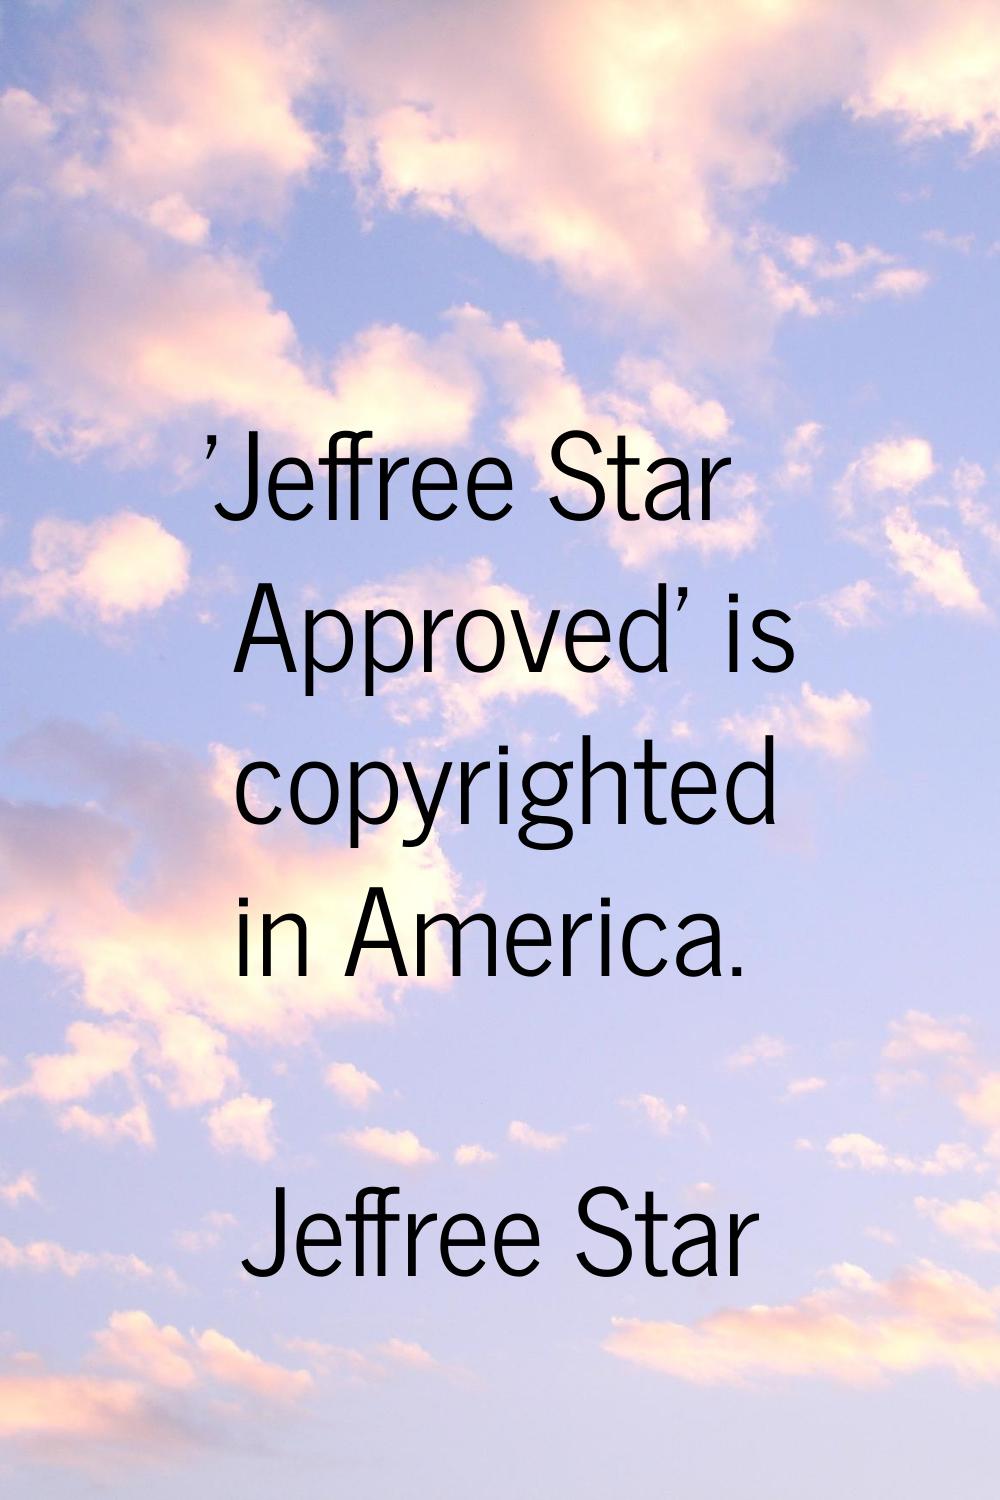 'Jeffree Star Approved' is copyrighted in America.